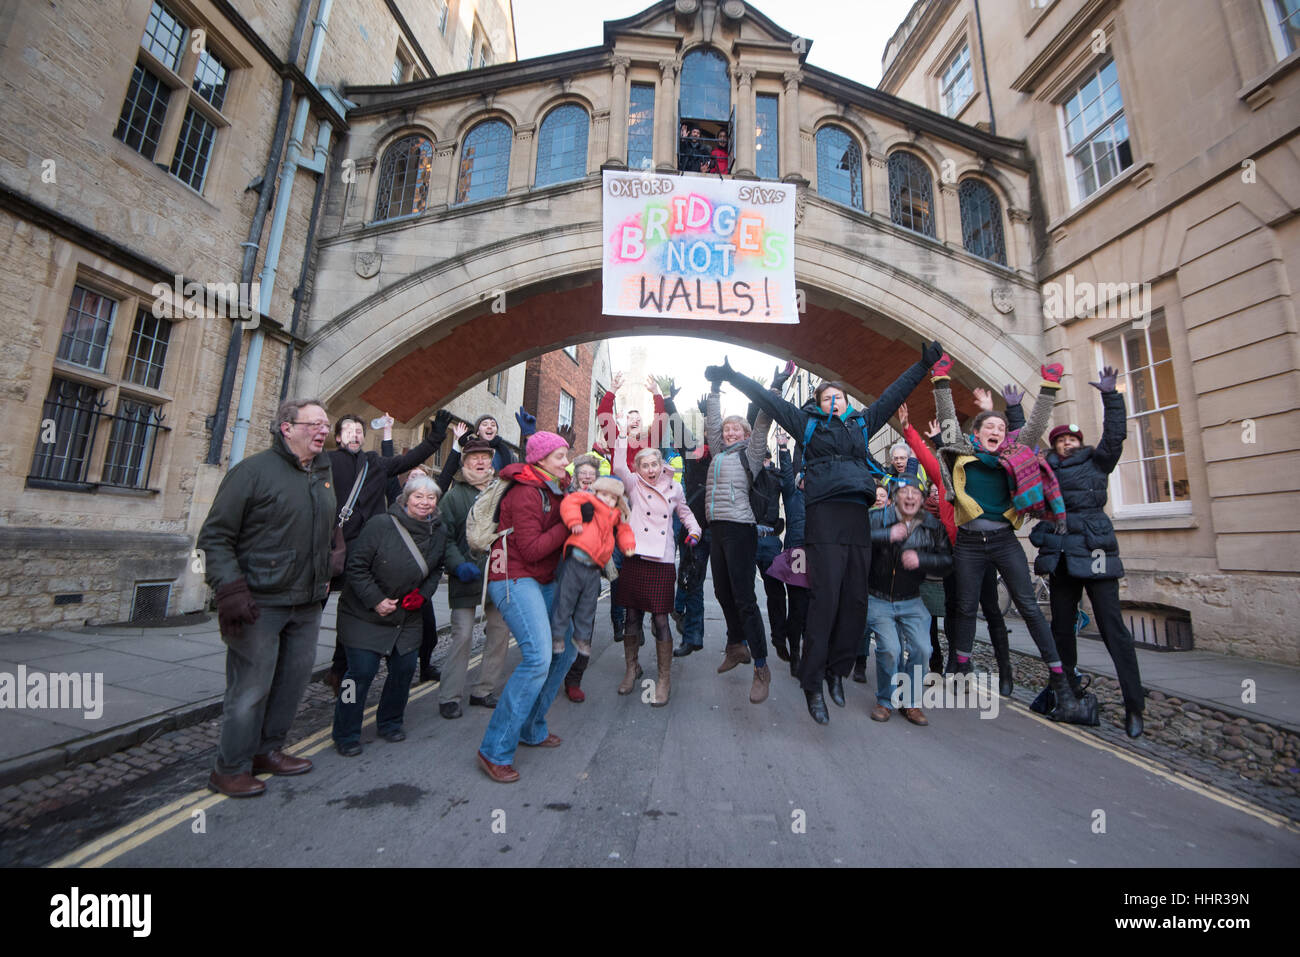 Oxford, UK. 20th January 2017. Oxford residents will be gathering in colourful clothes for a banner-drop at the Bridge of Sighs this morning protesting the rise of the far right and standing in solidarity with groups that feel threatened as Trump comes to power. Andrew Walmsley/Alamy Live News Stock Photo